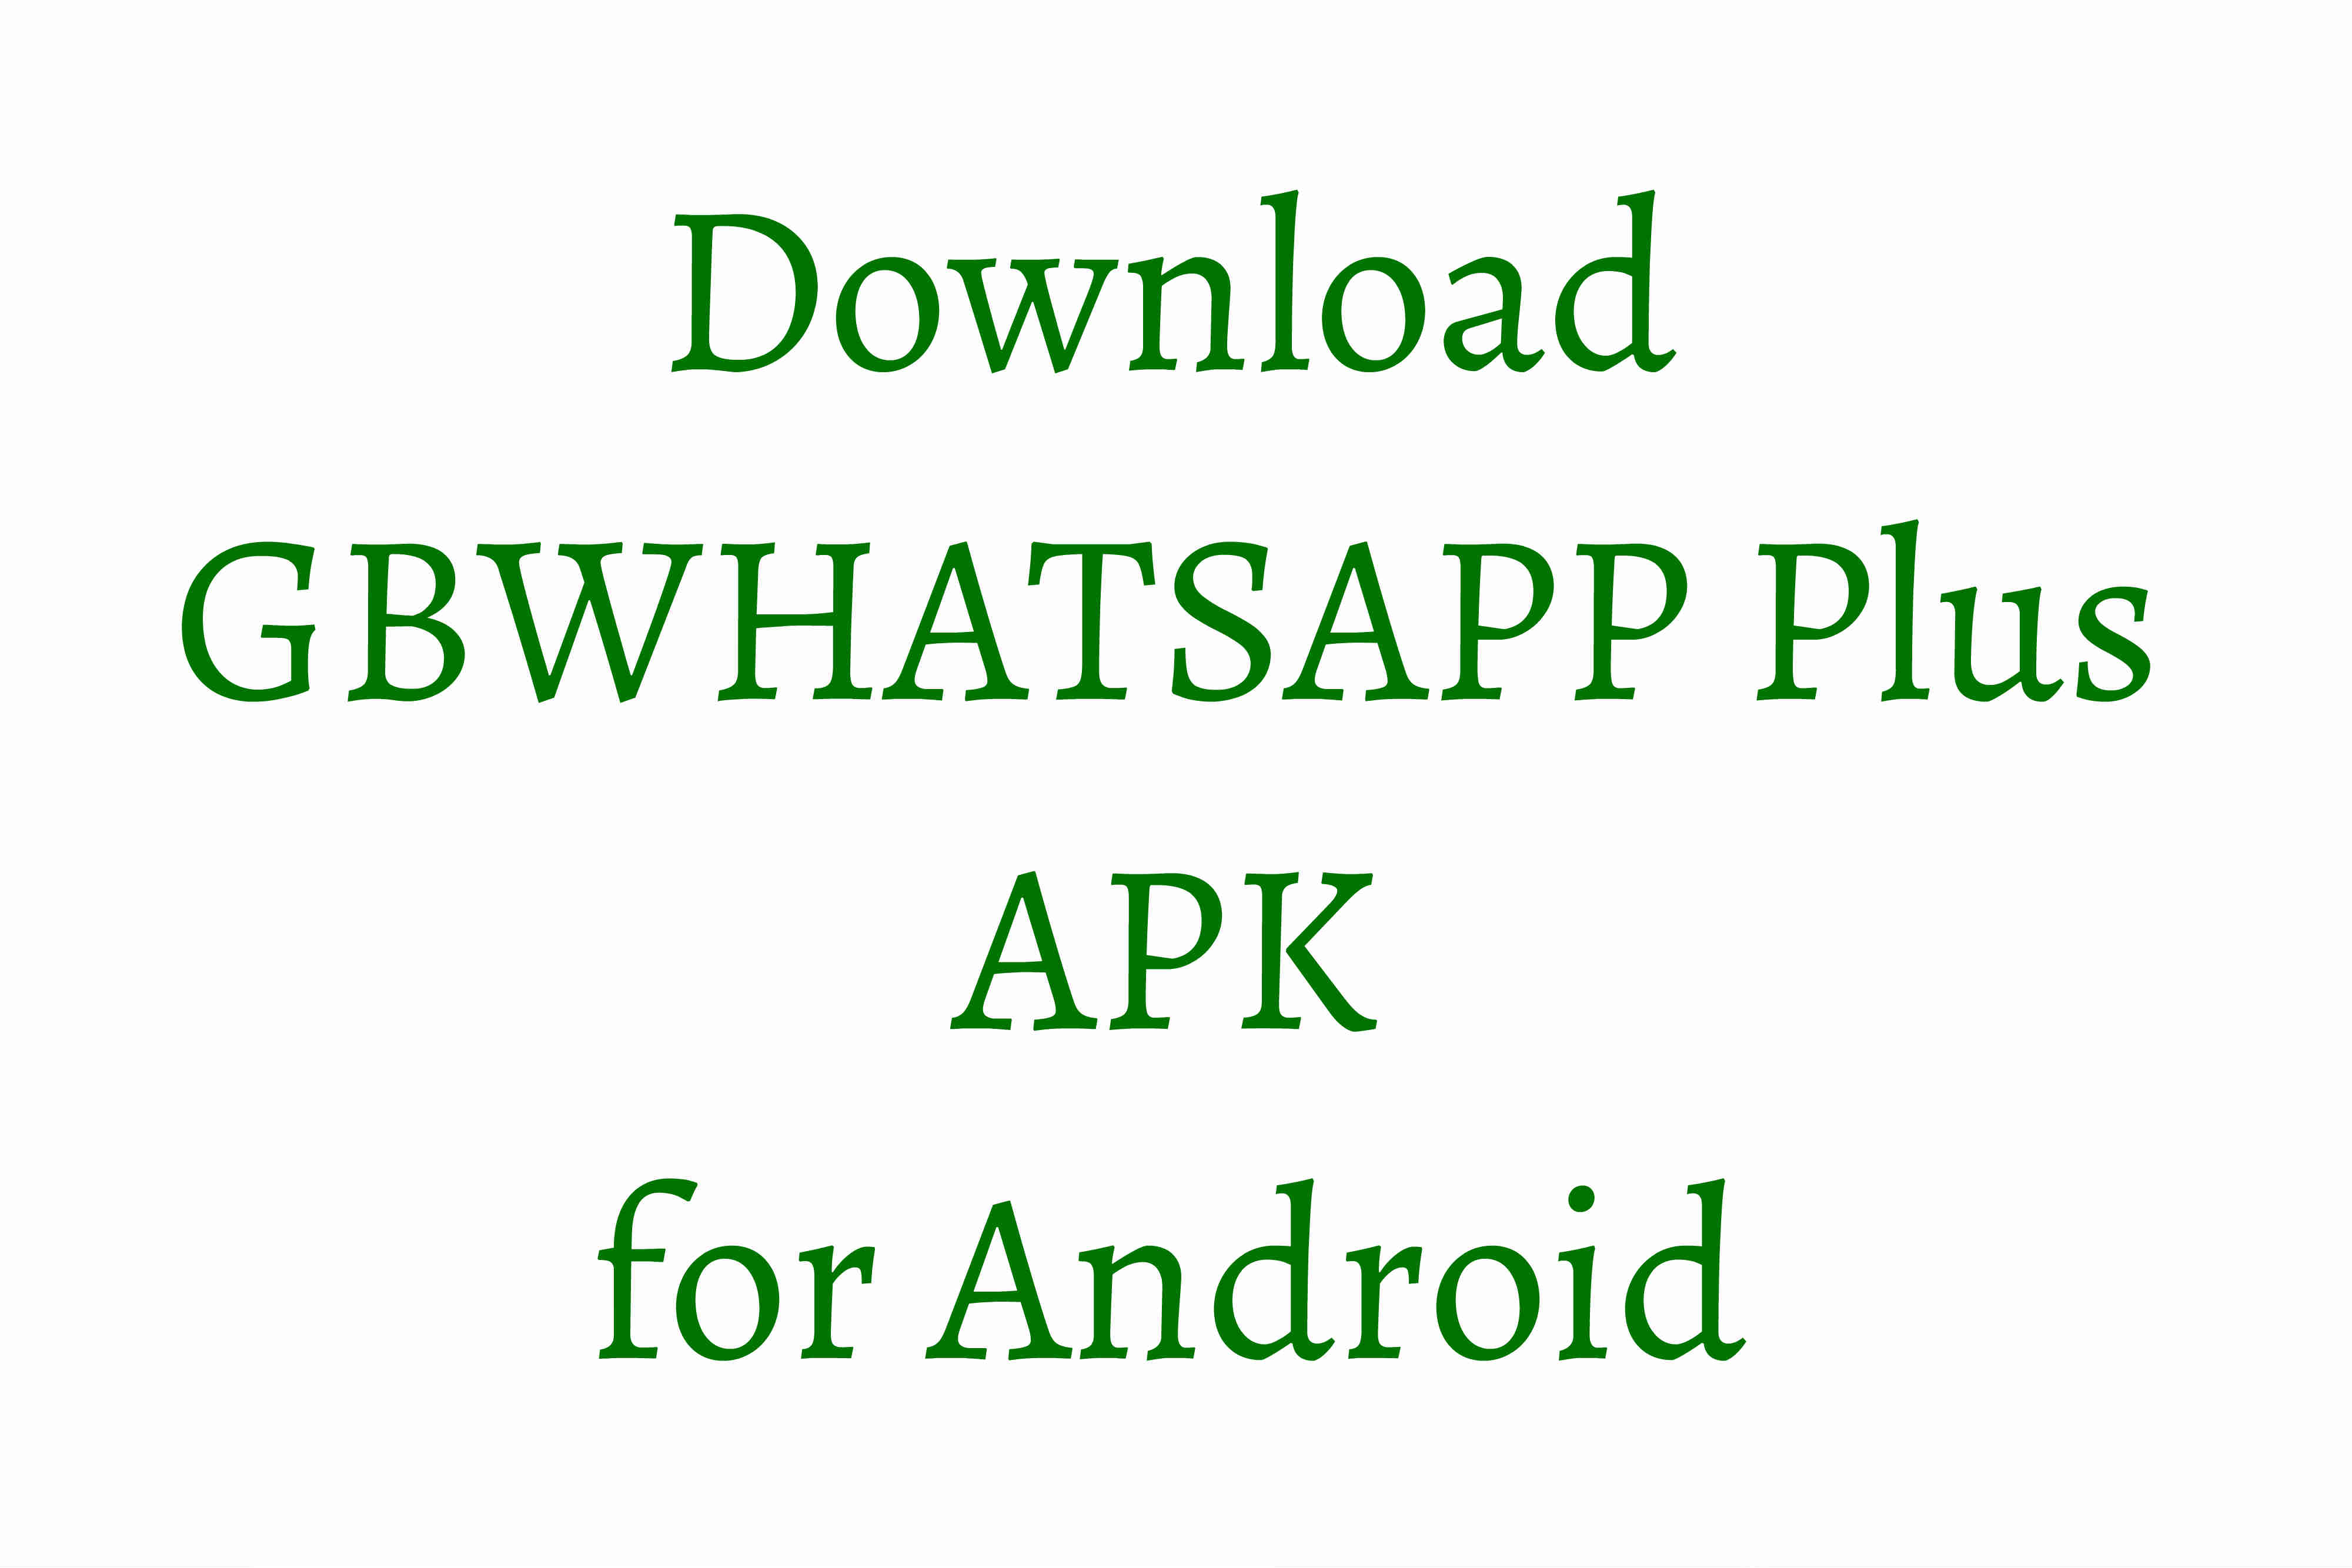 Download GBWHATSAPP Plus APK for Android